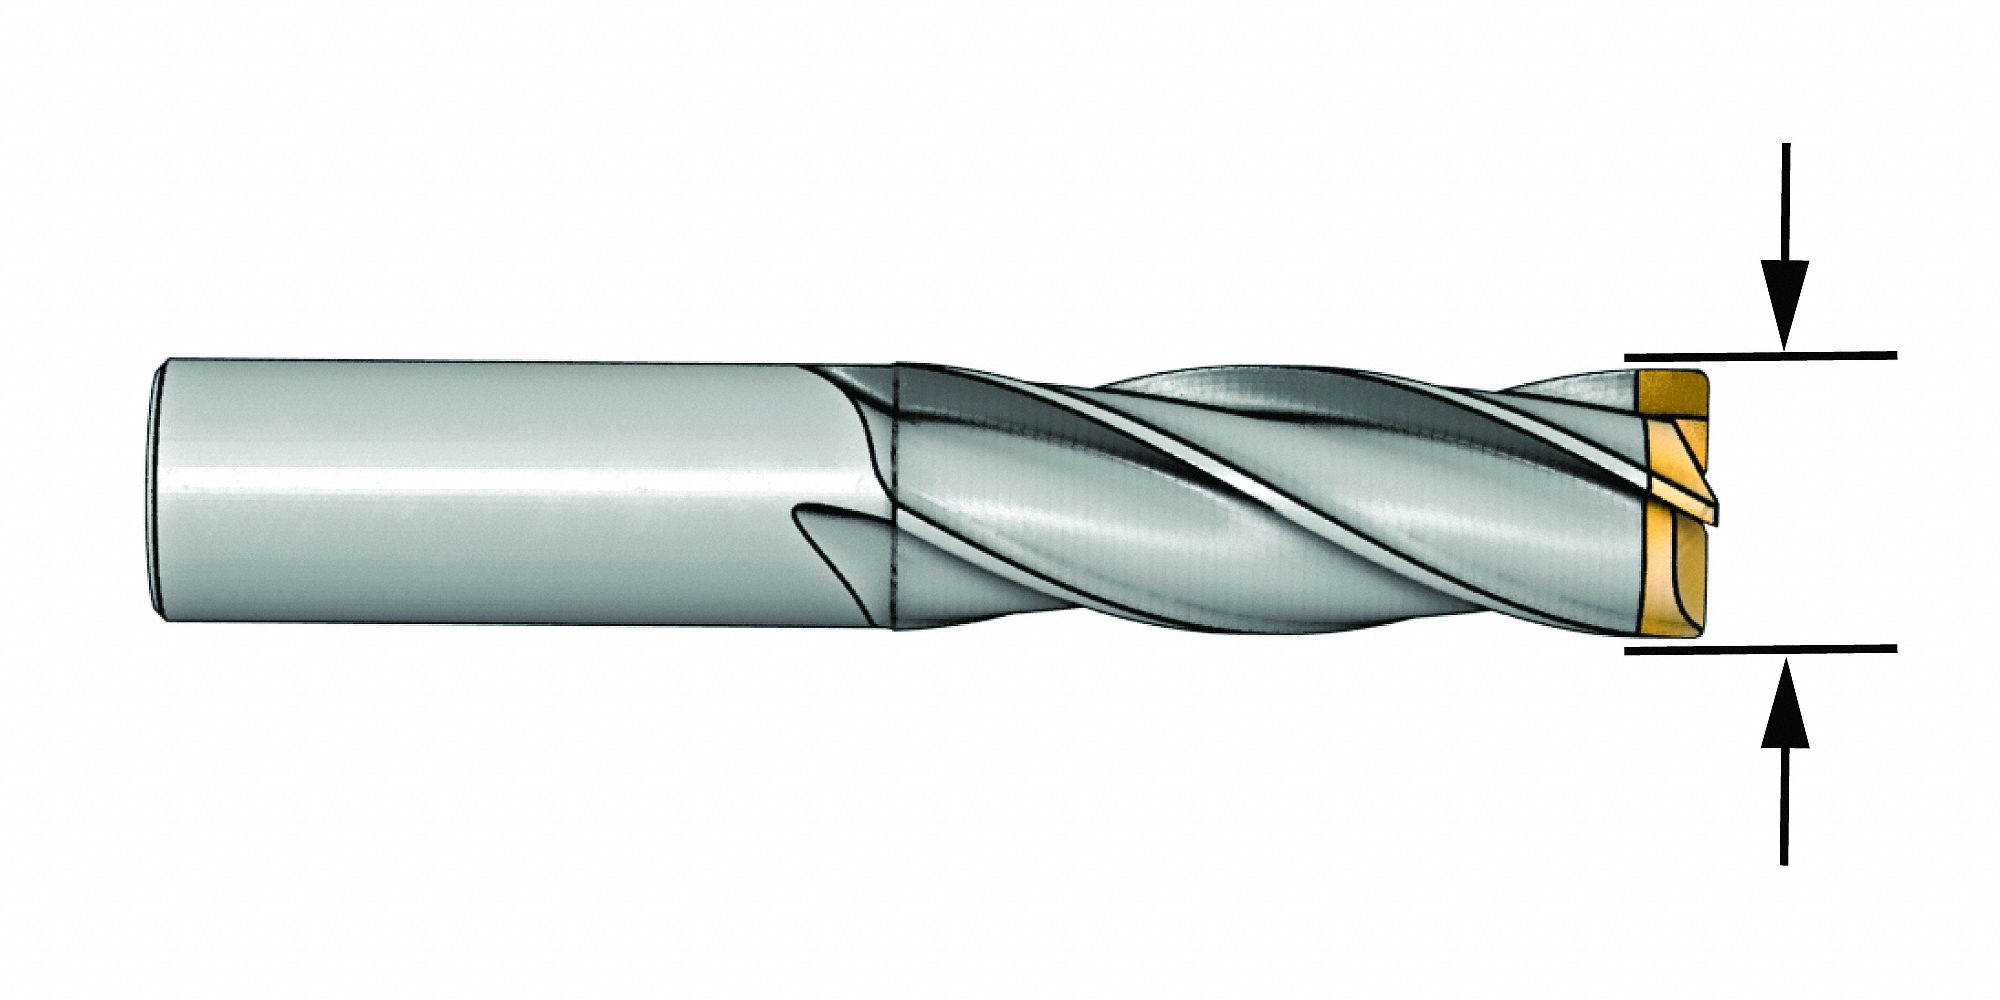 1-1/8 Length of Cut TiAlN Number of Flutes: 4 Cleveland Corner Radius End Mill 3/8 Milling Dia C80032 